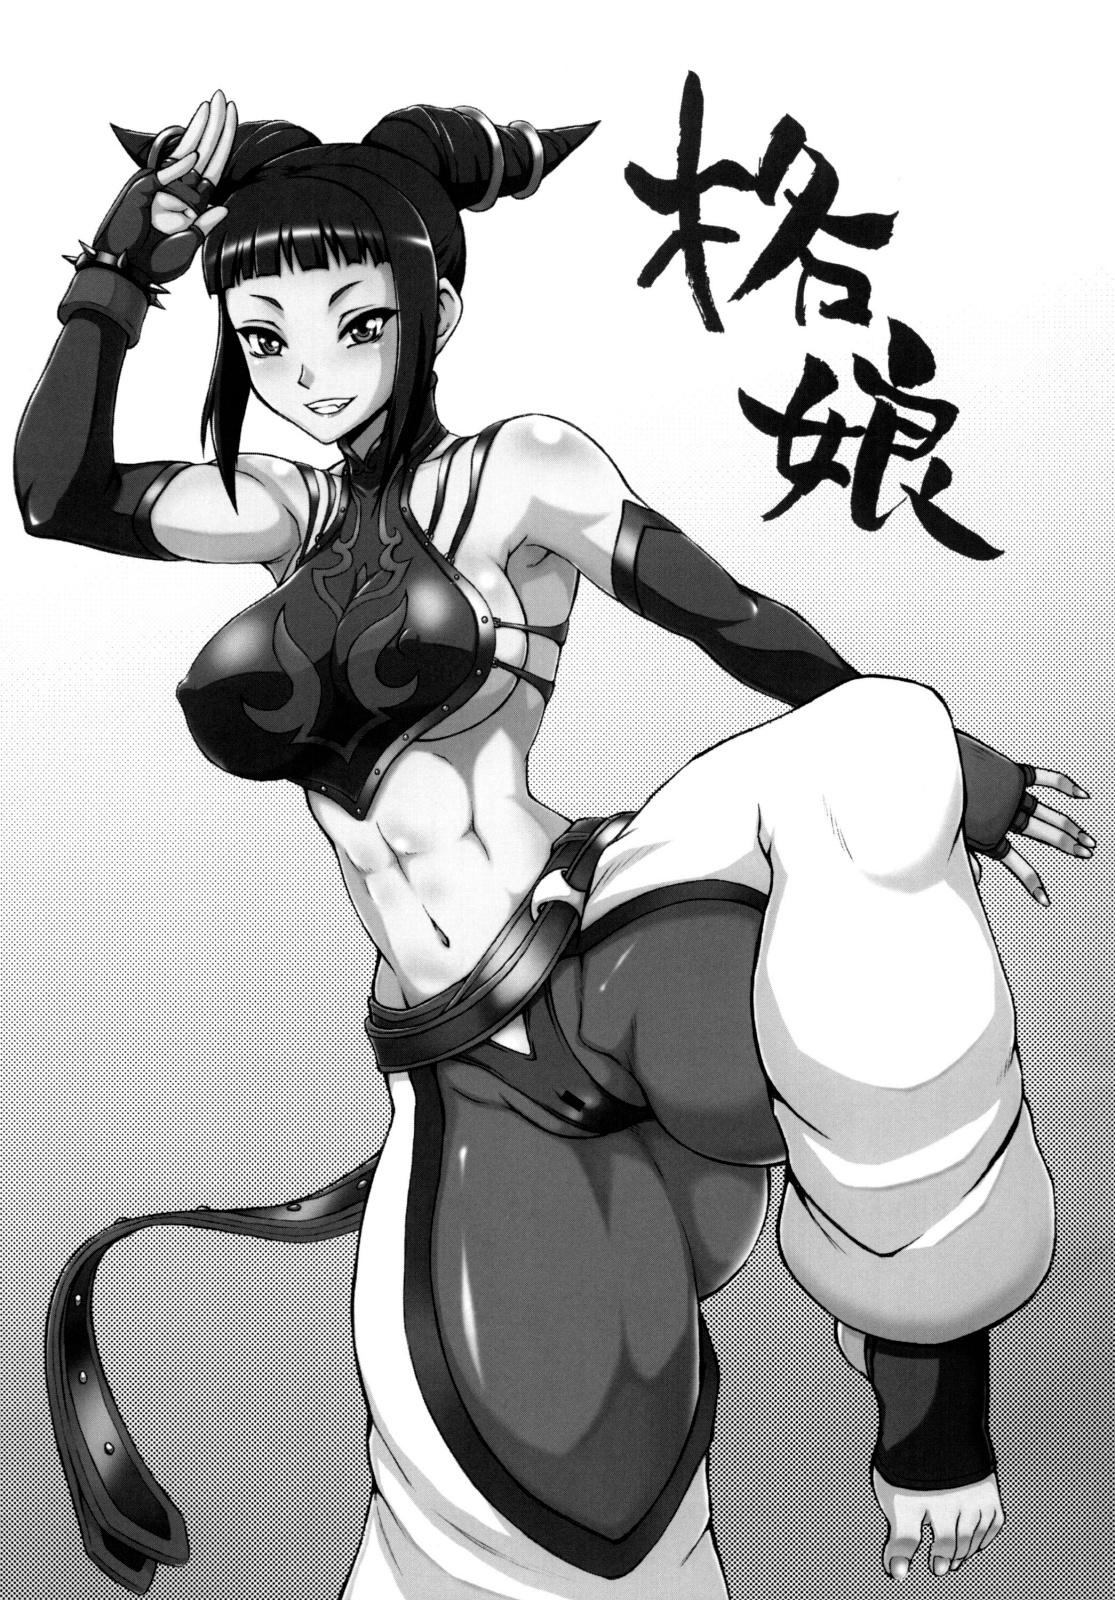 College Kaku Musume vol. 12 - Street fighter Japanese - Picture 3